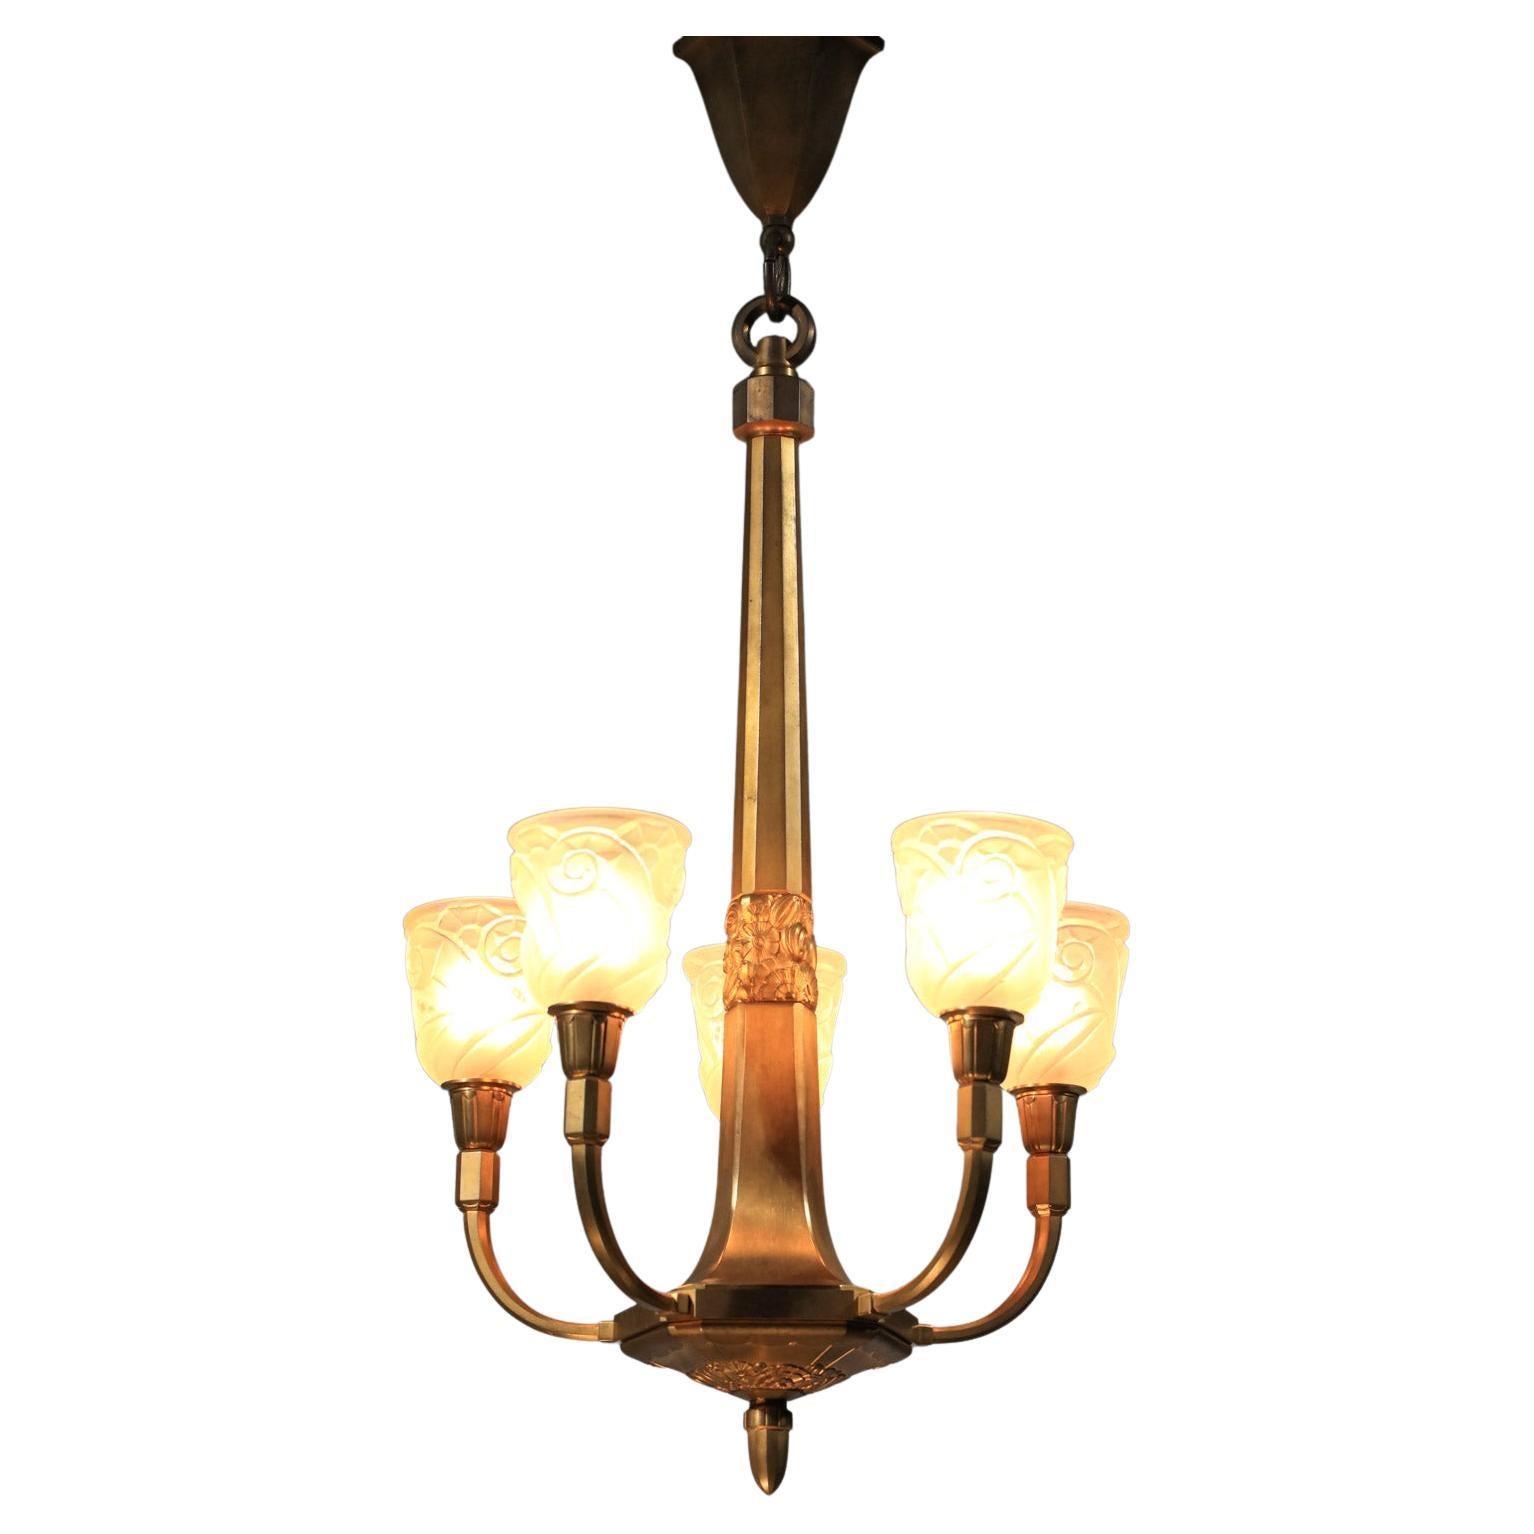 Imposing Art Deco chandelier from the 1930s, signed J. Coduré, a Lyon silversmith of the period. Gilded bronze structure (the chandelier is quite heavy) with a central frieze featuring floral motifs. 5 white frosted glass shades, created using a